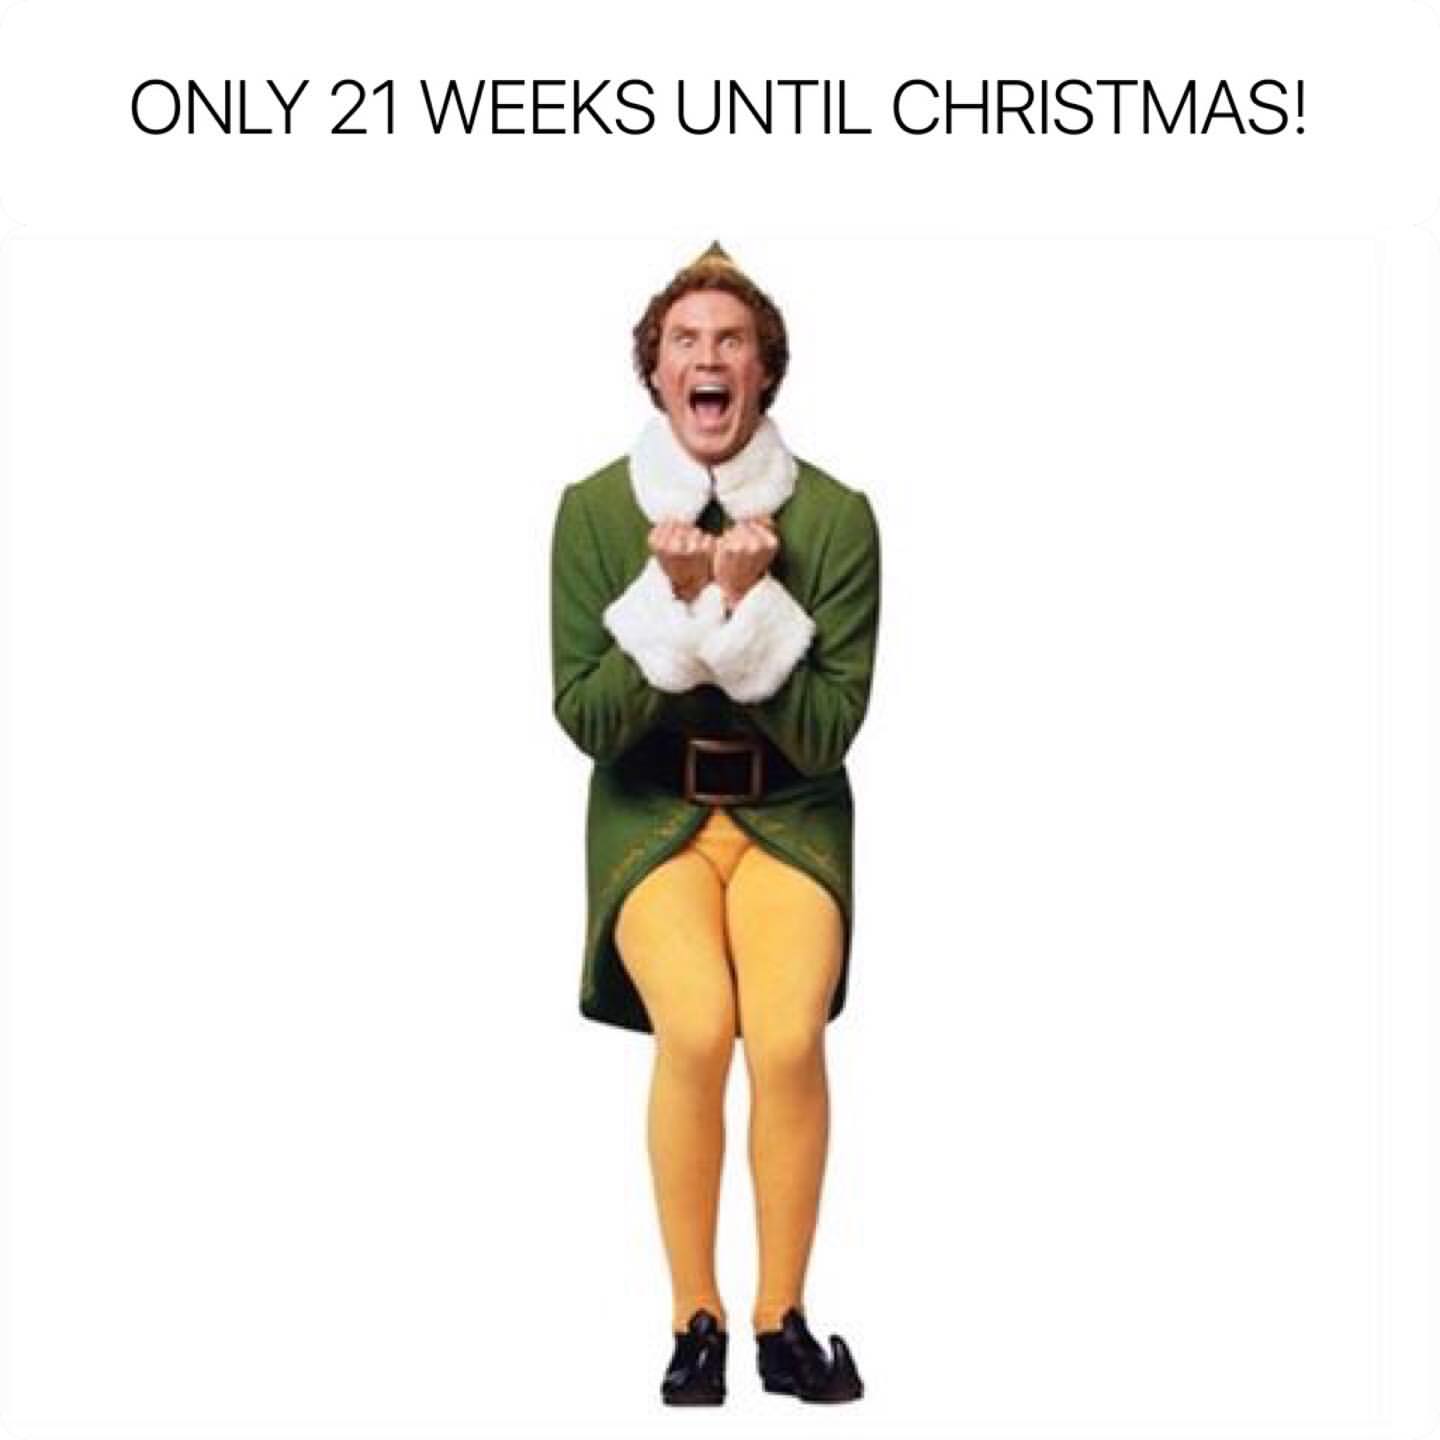 Only 21 weeks until Christmas!